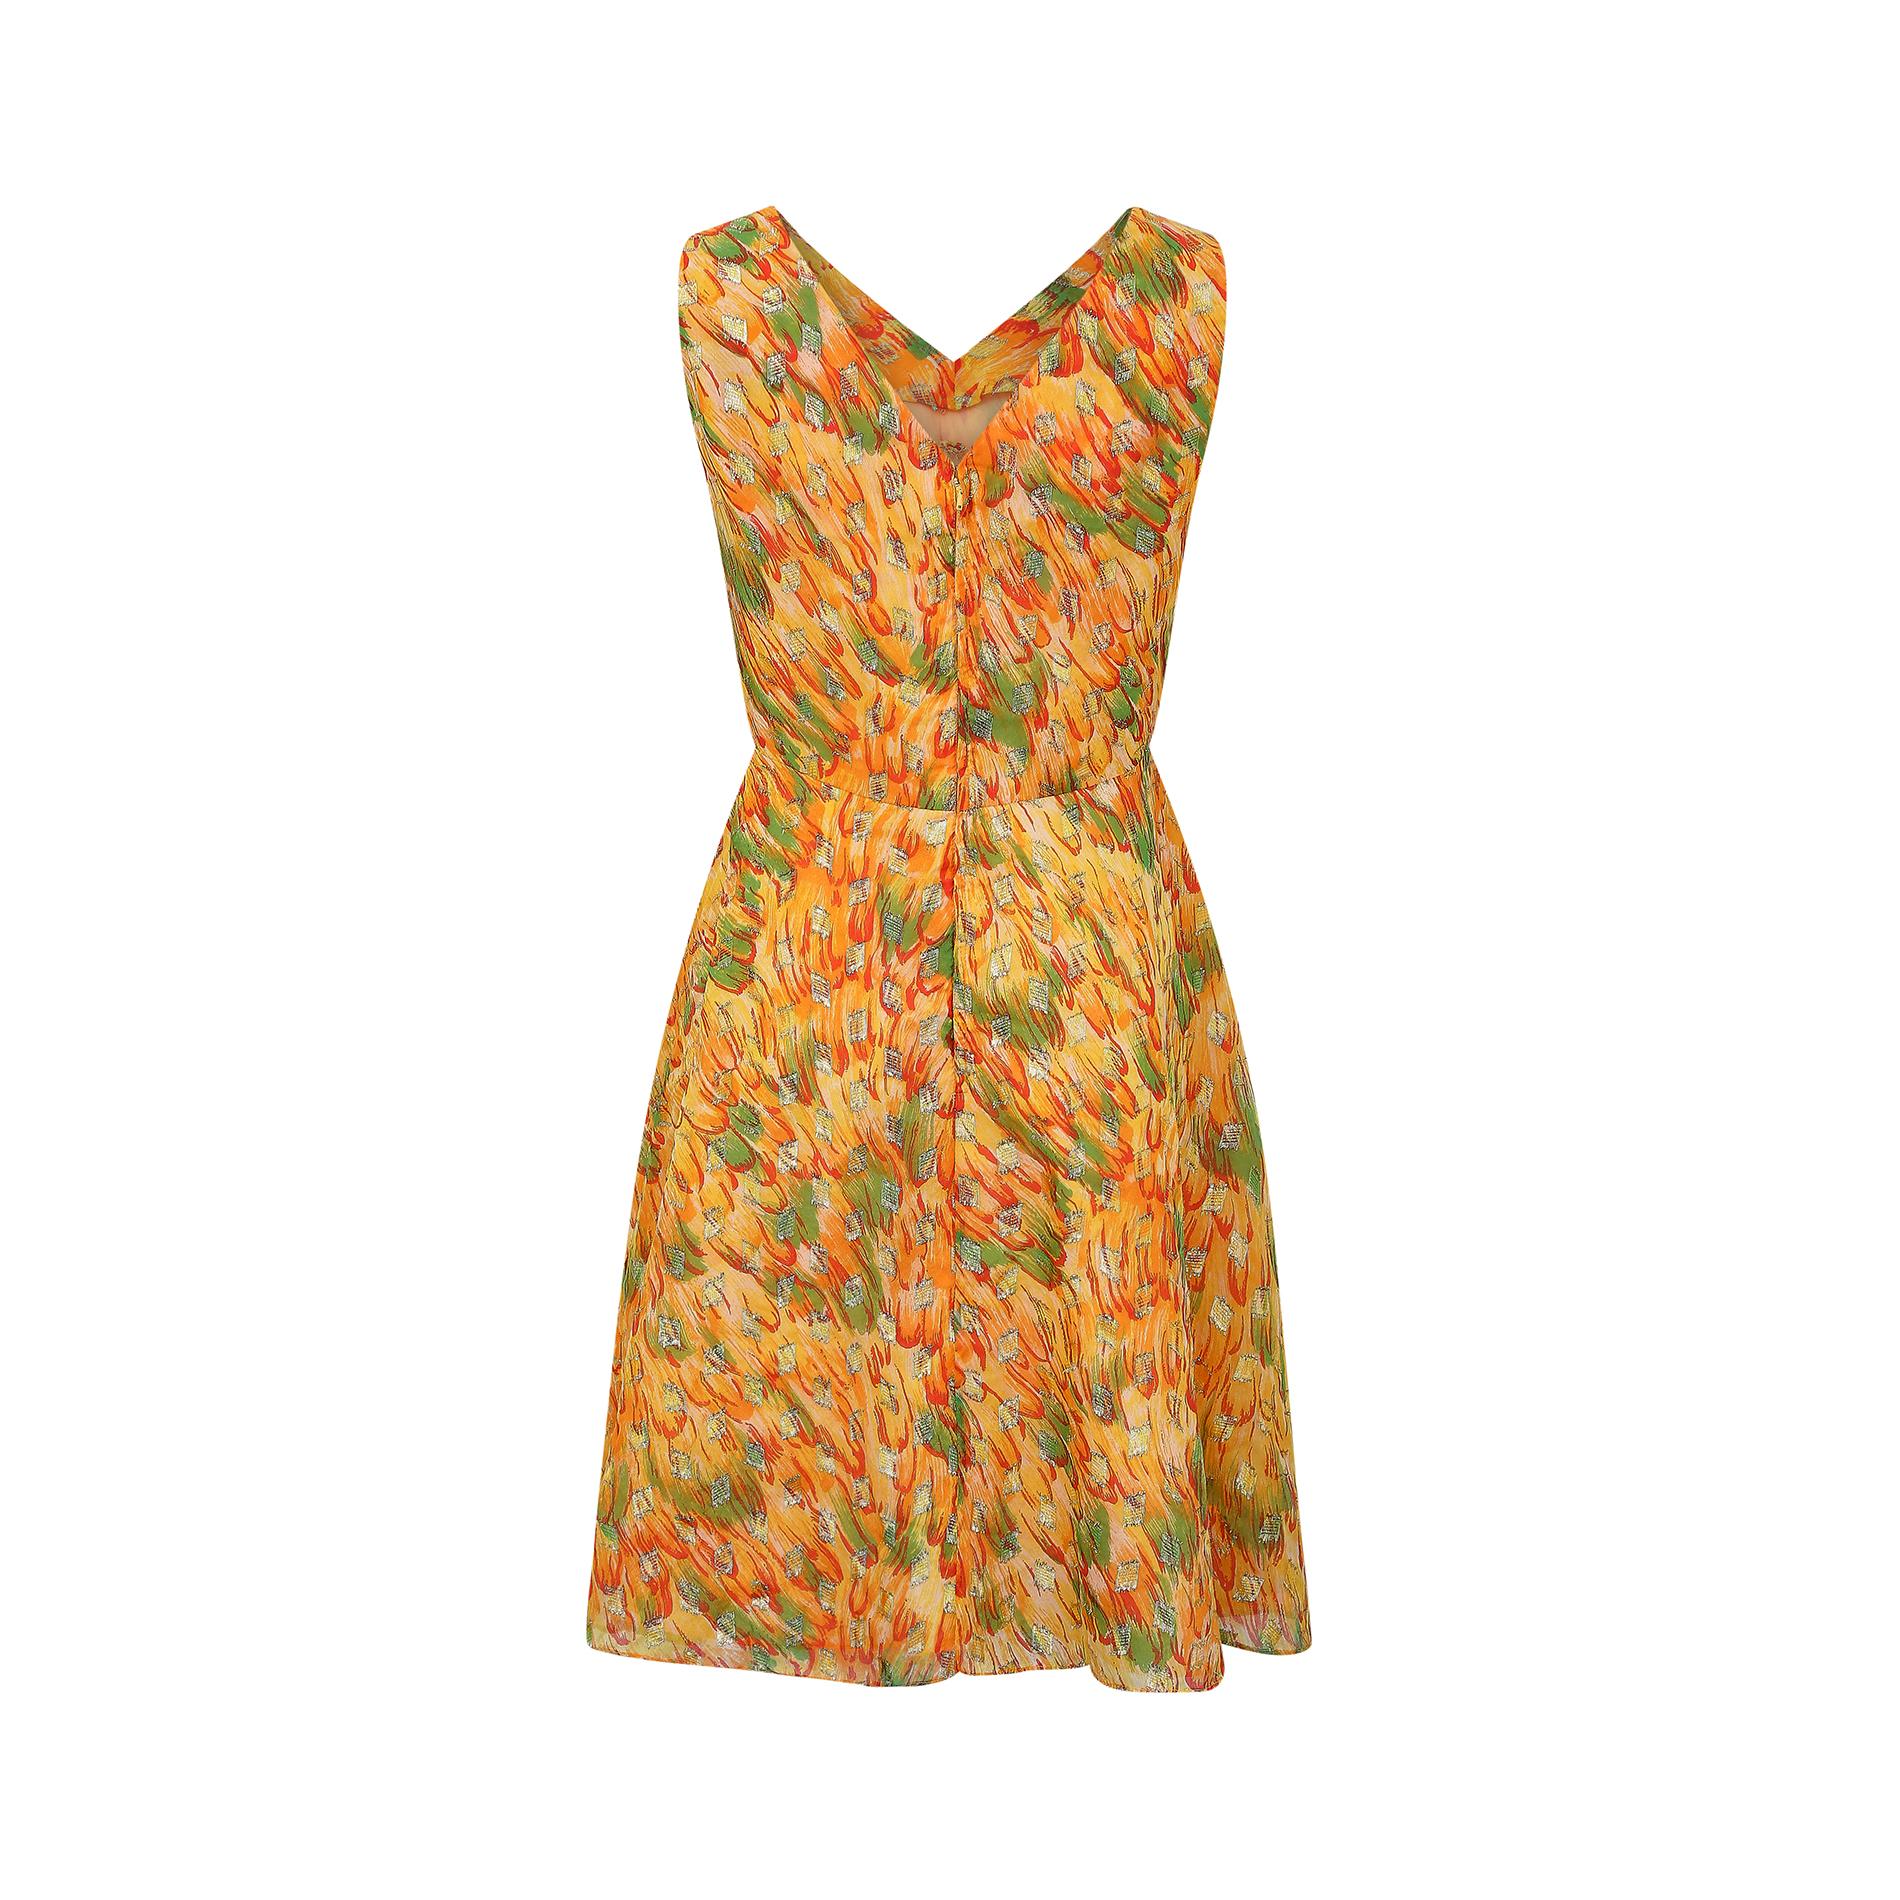 Women's 1960s Bright Feather Print and Gold Lame Dress